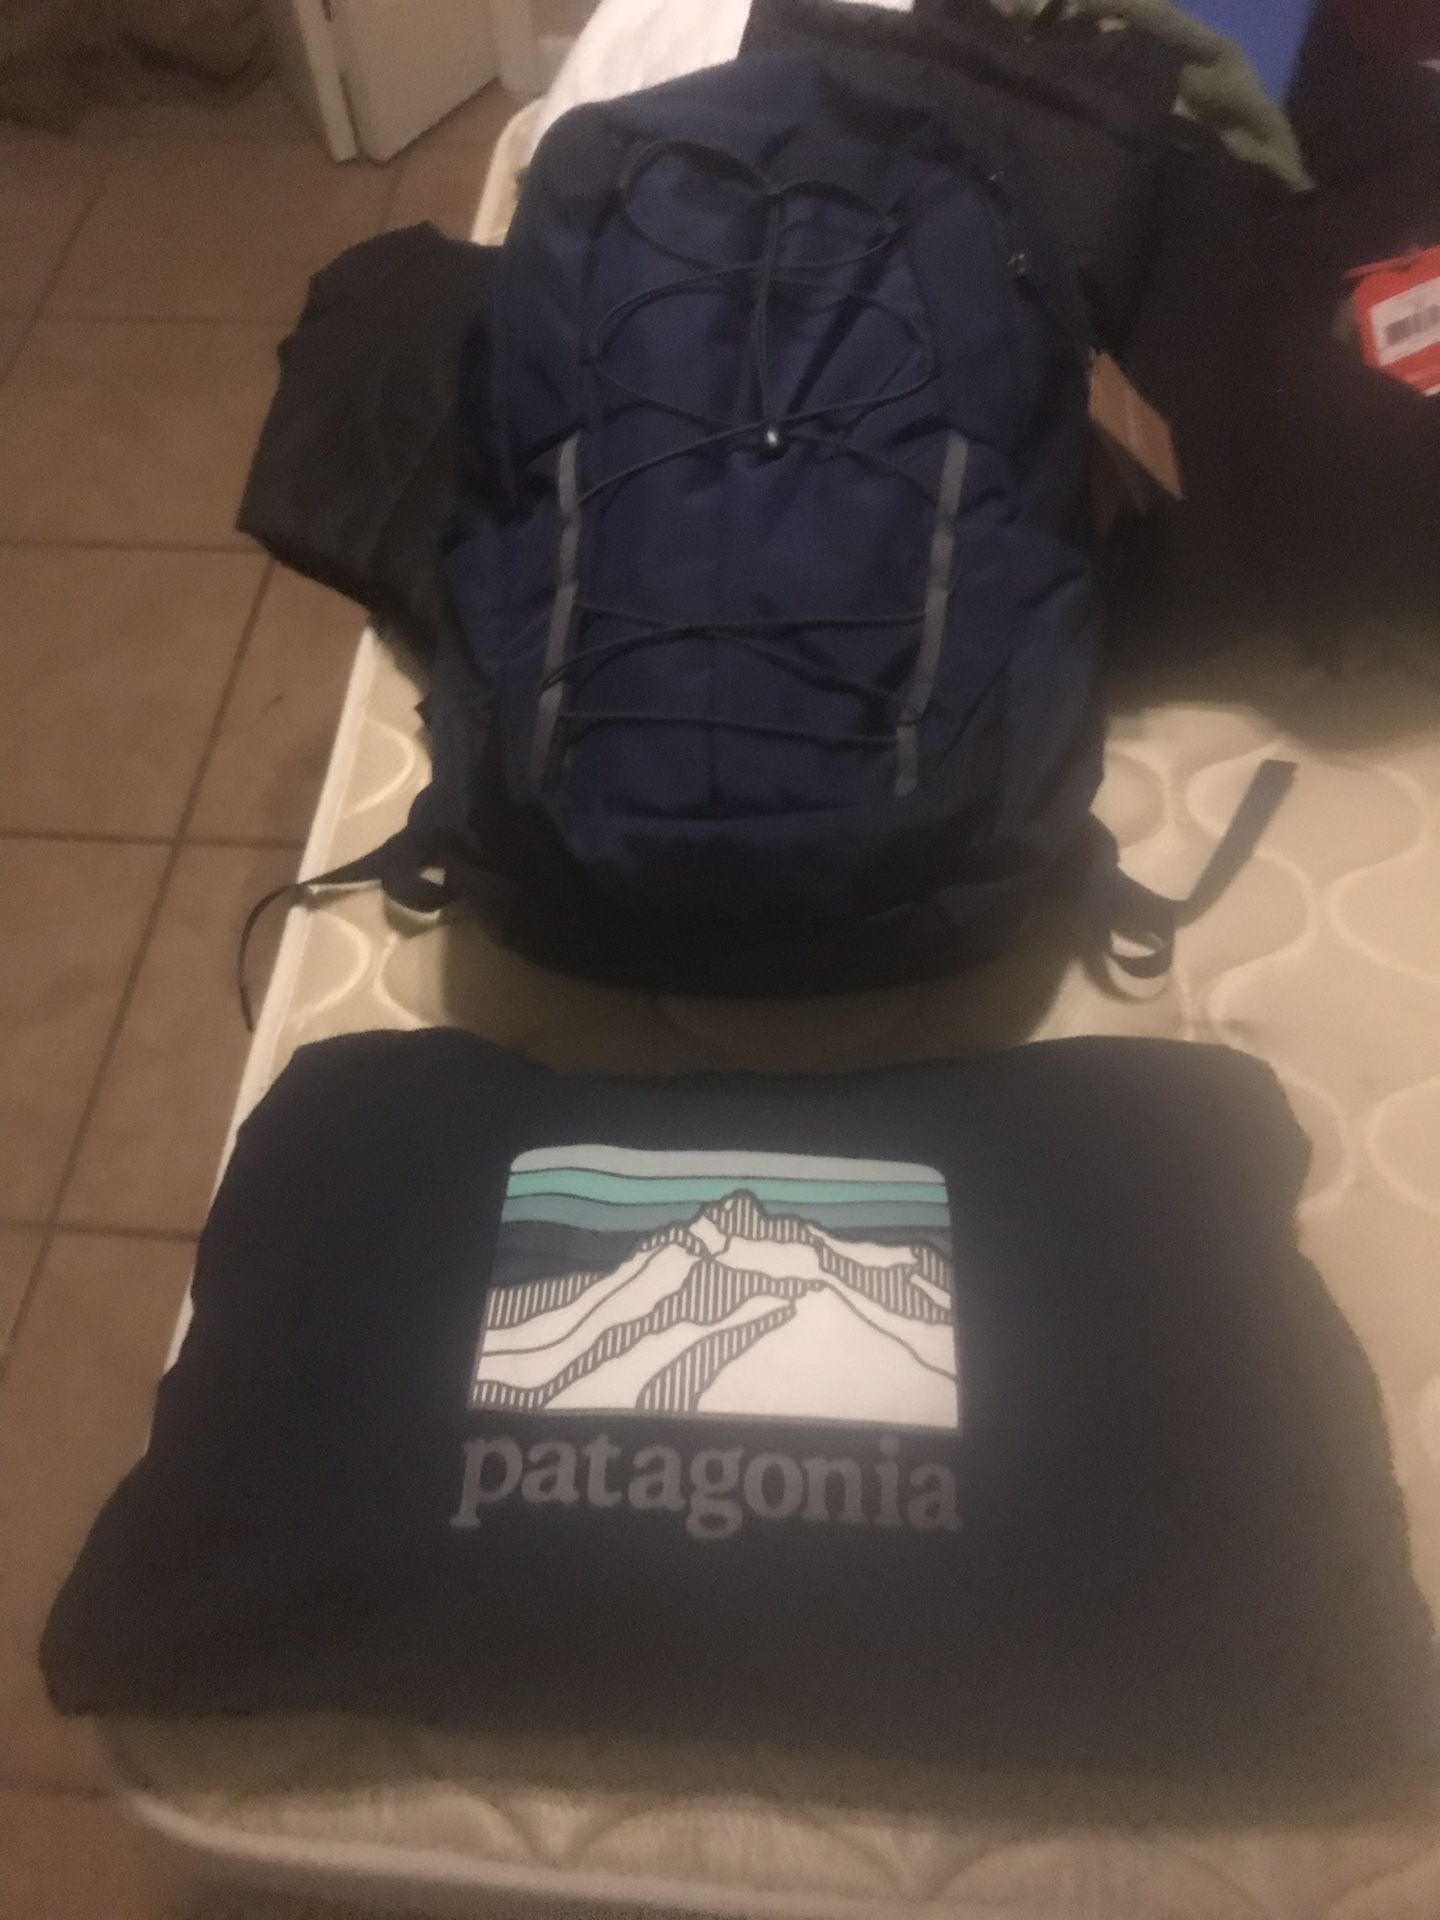 Brand new Patagonia back pack with matching hood has tags MSRP 200$